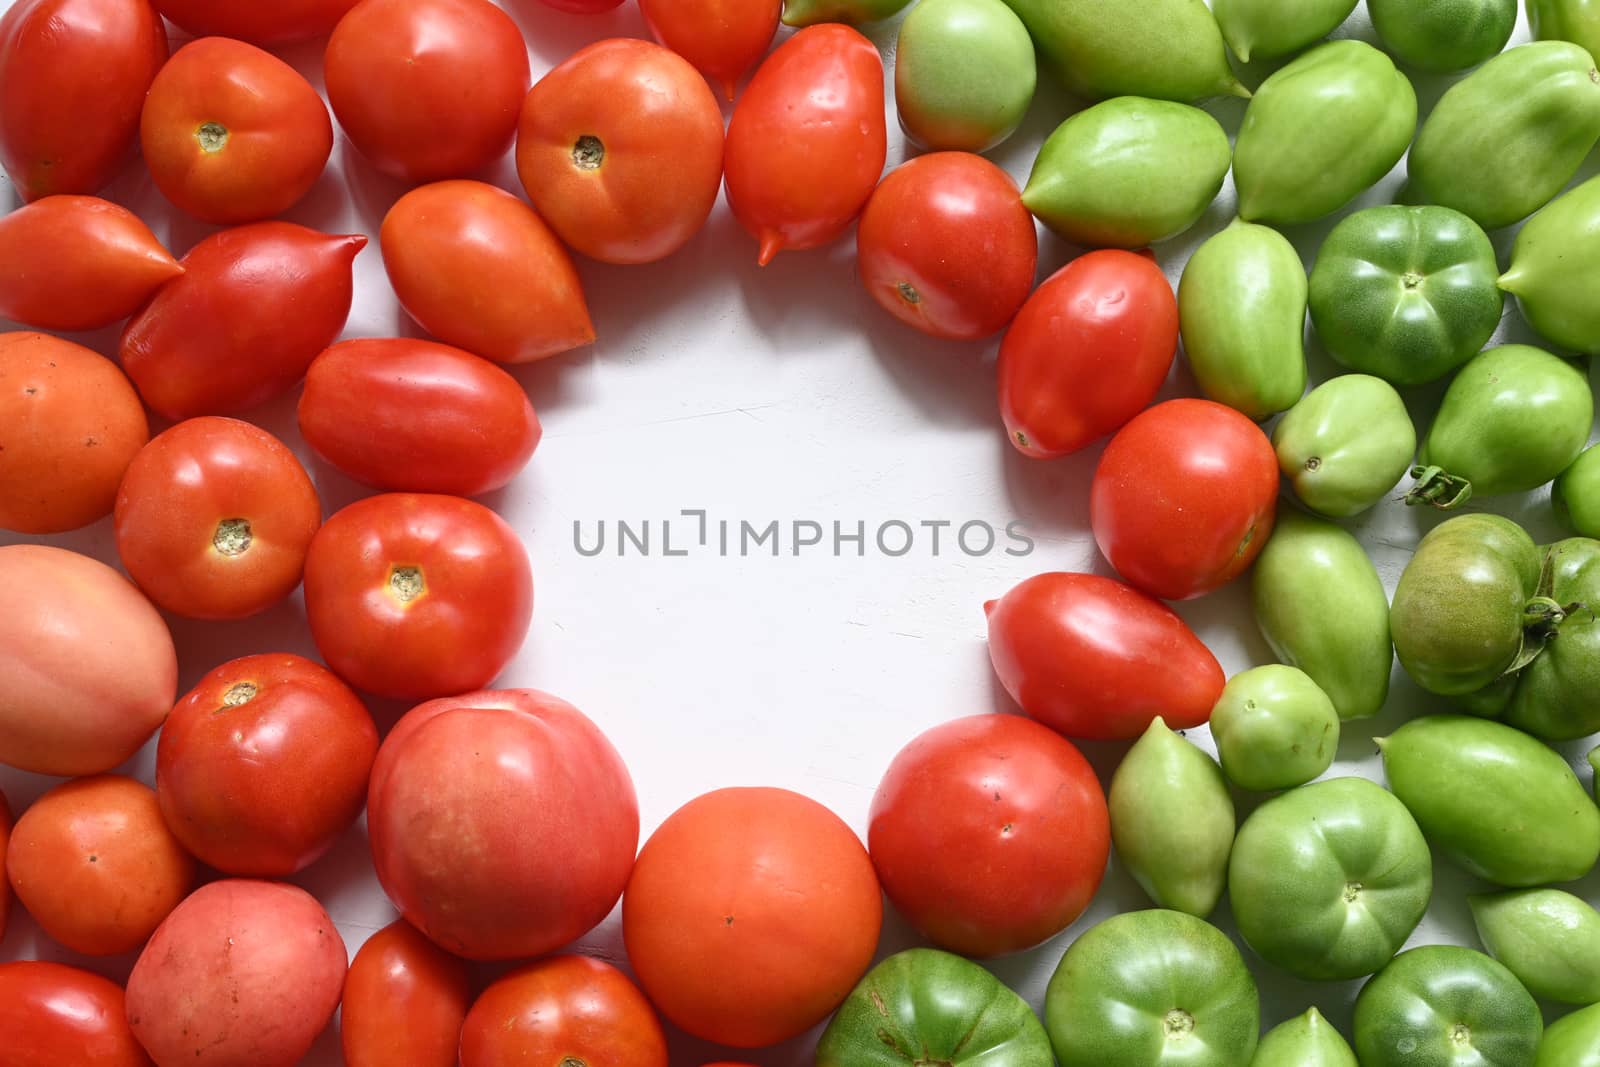 Optimal green and red tomatoes in the foreground. by sashokddt